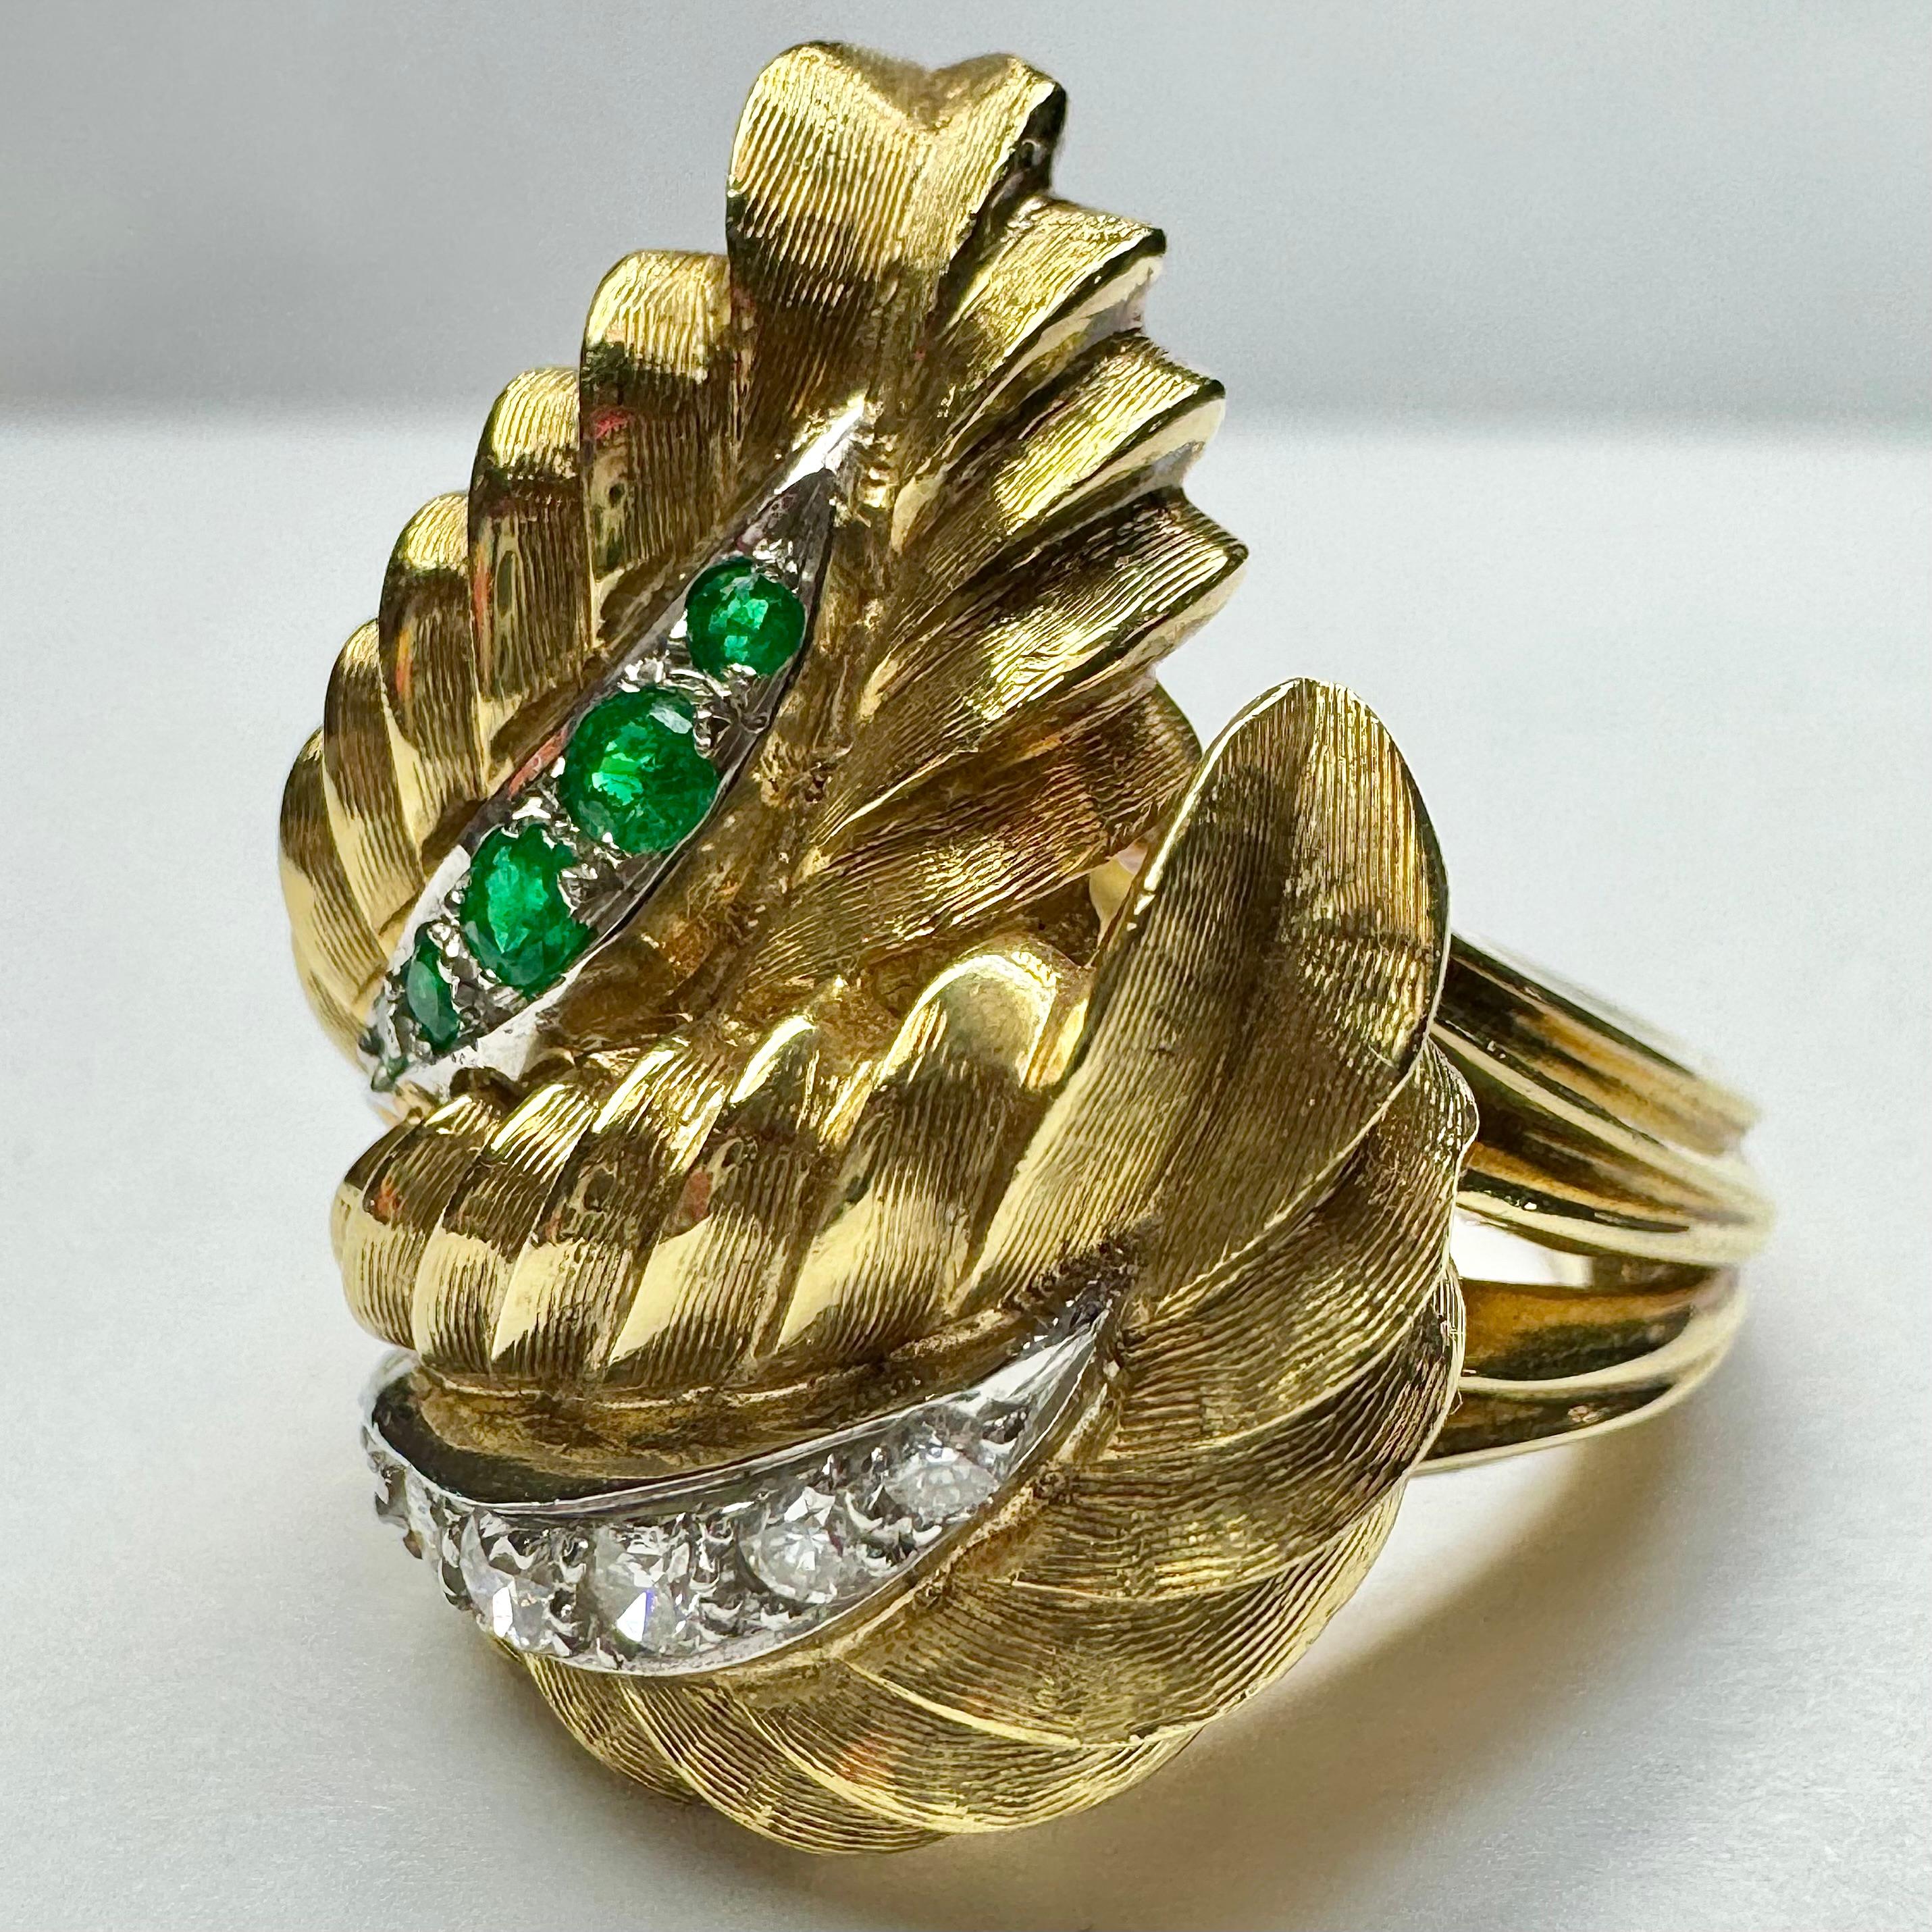 Gorgeous and unique, one-of-a-kind vintage emerald and diamond ring, in solid 18k yellow gold. Beautiful golden leaf design with delicate lined texture detailing the intricate layers of the leaf pattern. There are 5 stunning green emeralds featured